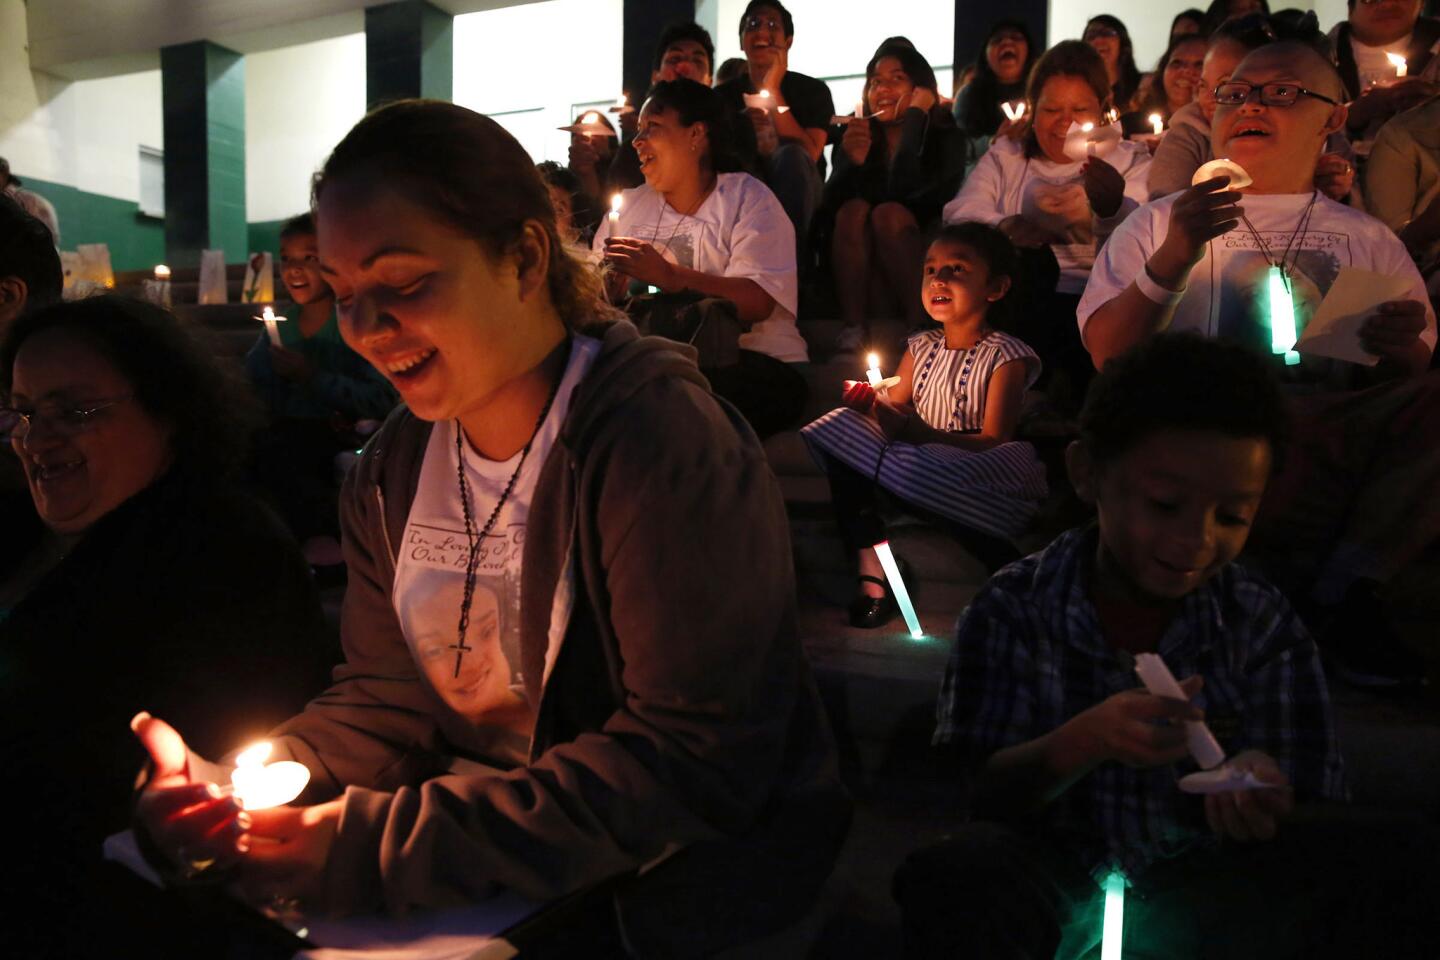 Hailey Ordonez, 4, center, sits with other family members during a rousing candlelight vigil for her aunt, Dorsey High student Jennifer Bonilla, one of the 10 killed in last week's bus crash in Orland.